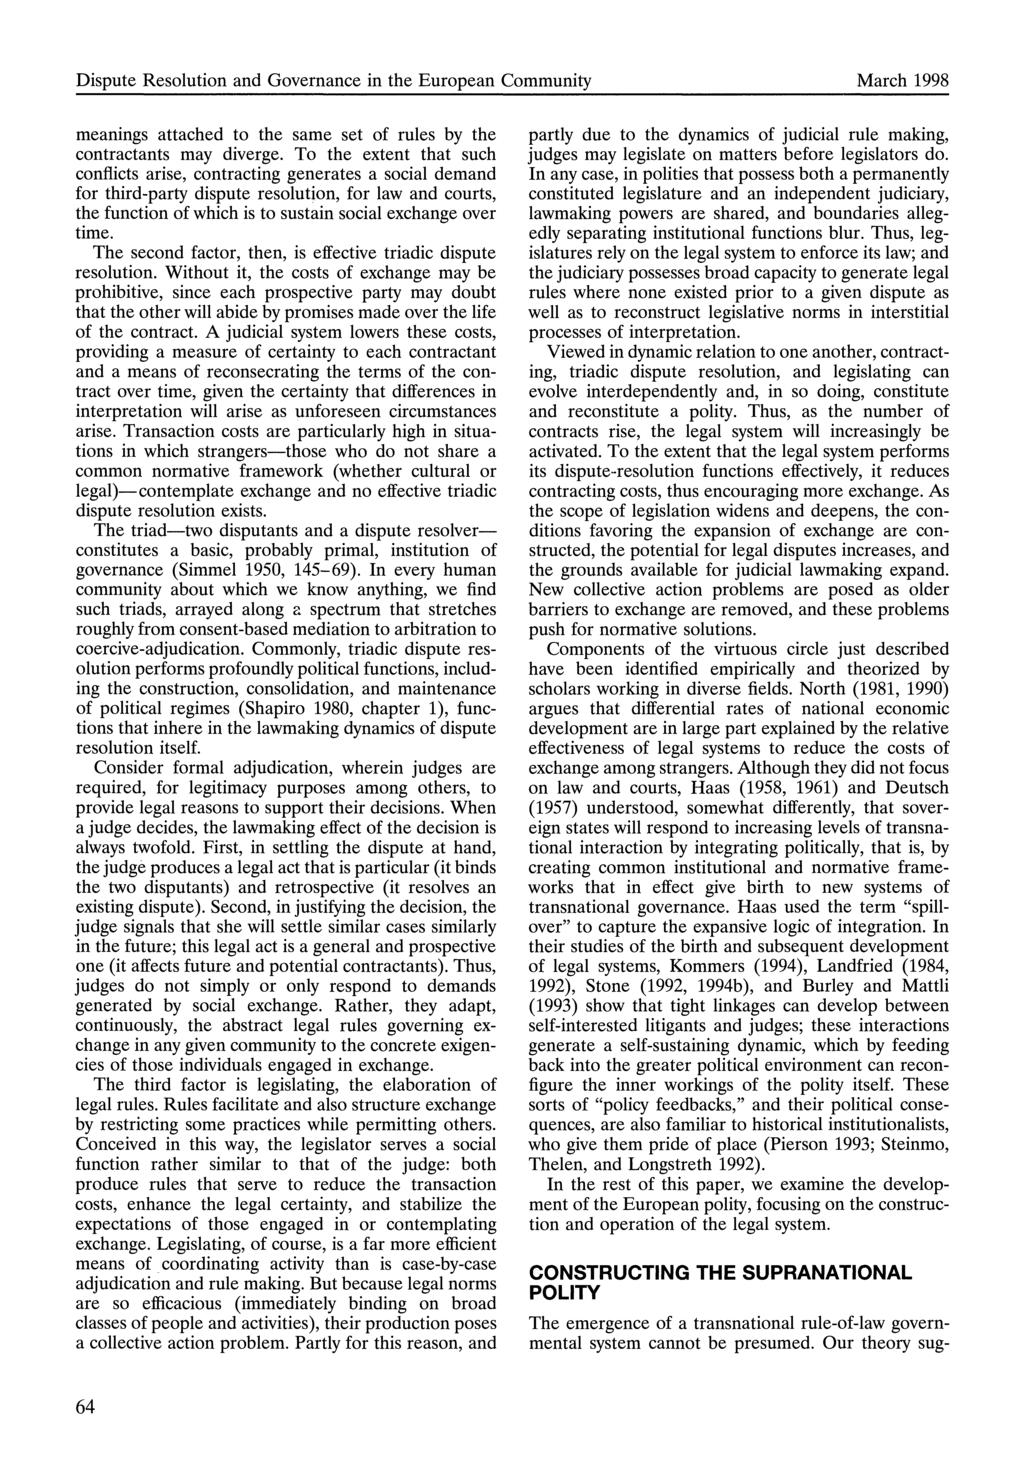 Dispute Resolution and Governance in the European Community March 1998 meanings attached to the same set of rules by the contractants may diverge.